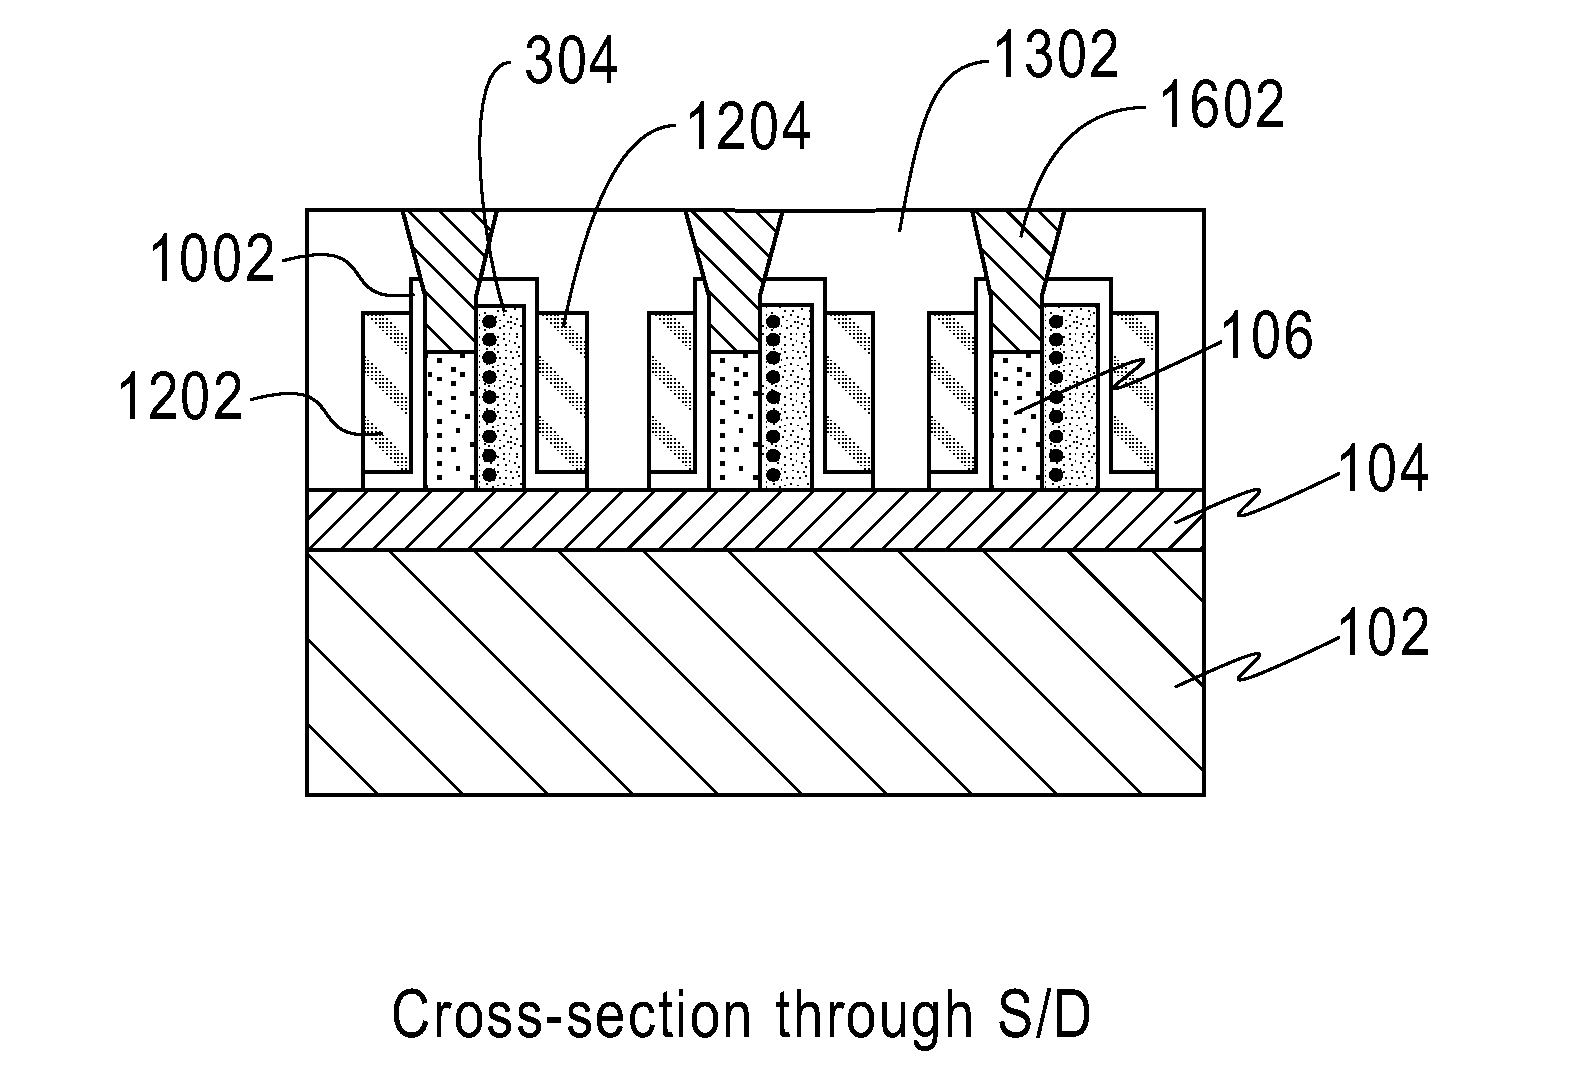 FinFET NON-VOLATILE MEMORY AND METHOD OF FABRICATION